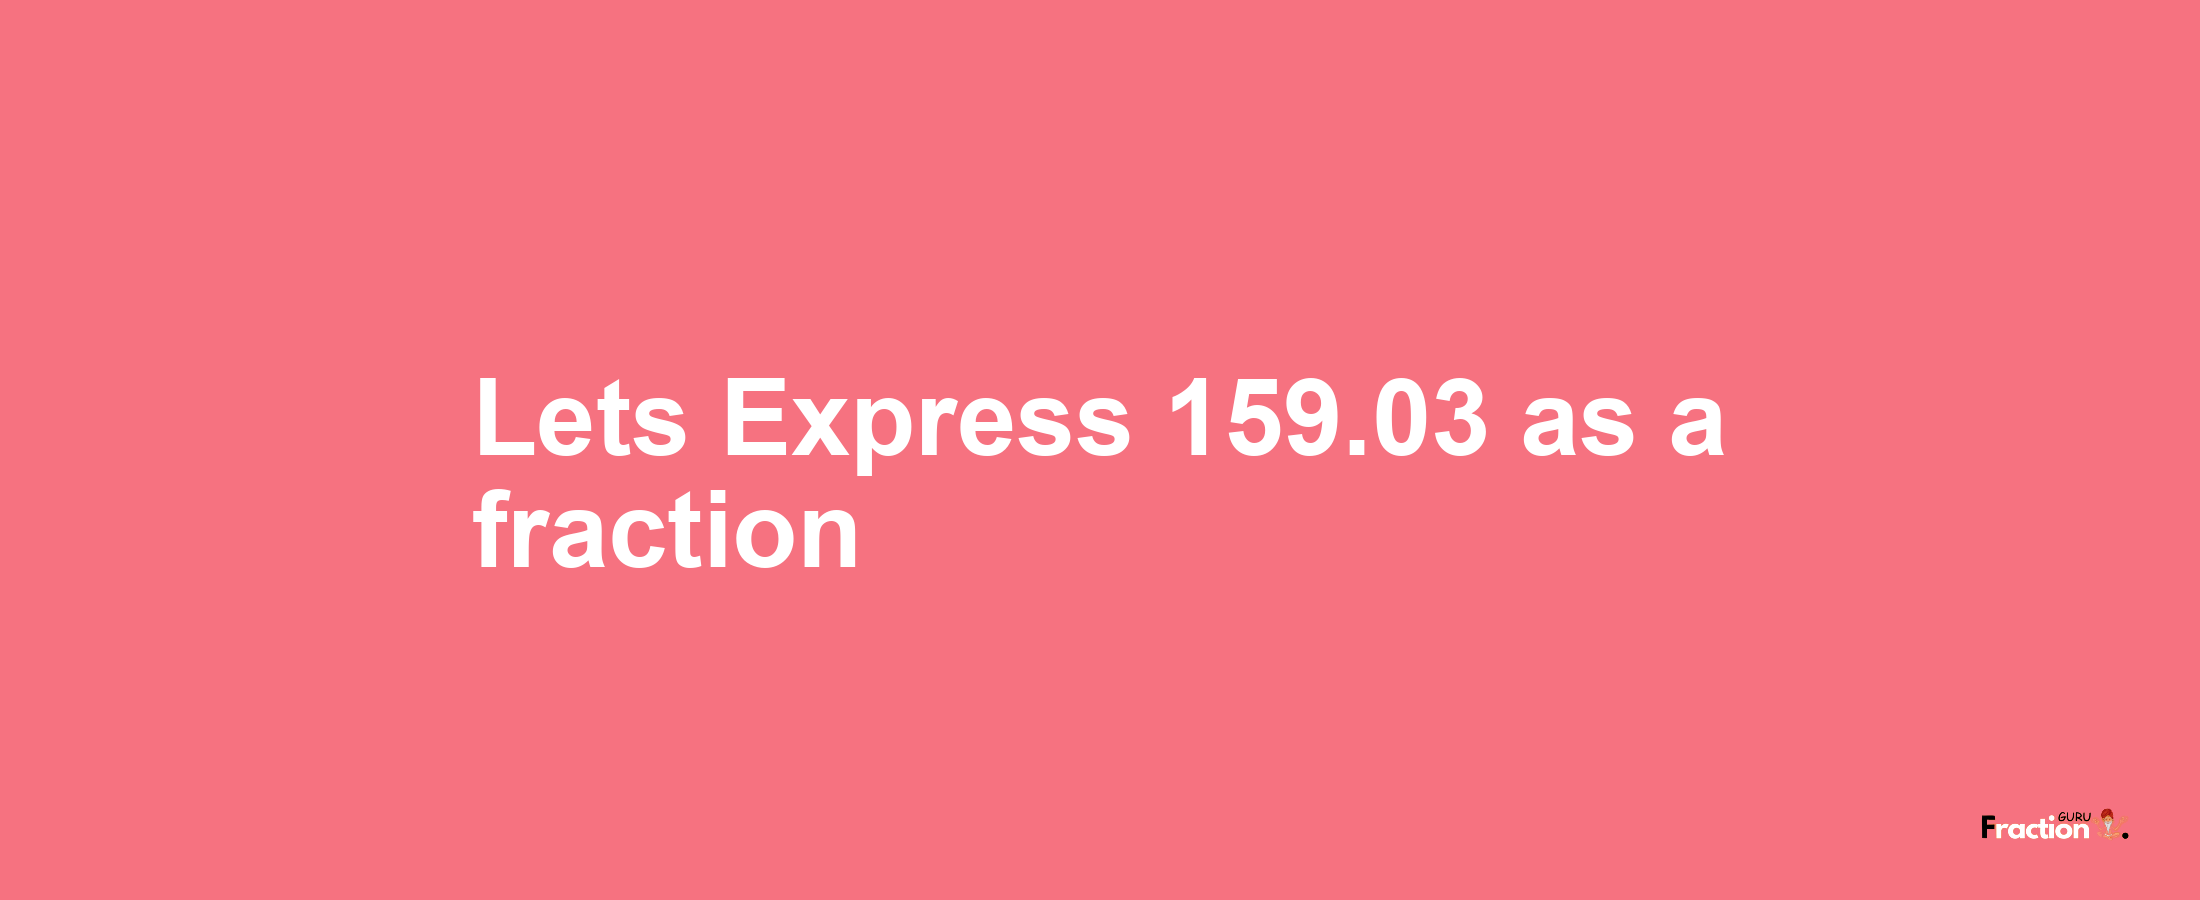 Lets Express 159.03 as afraction